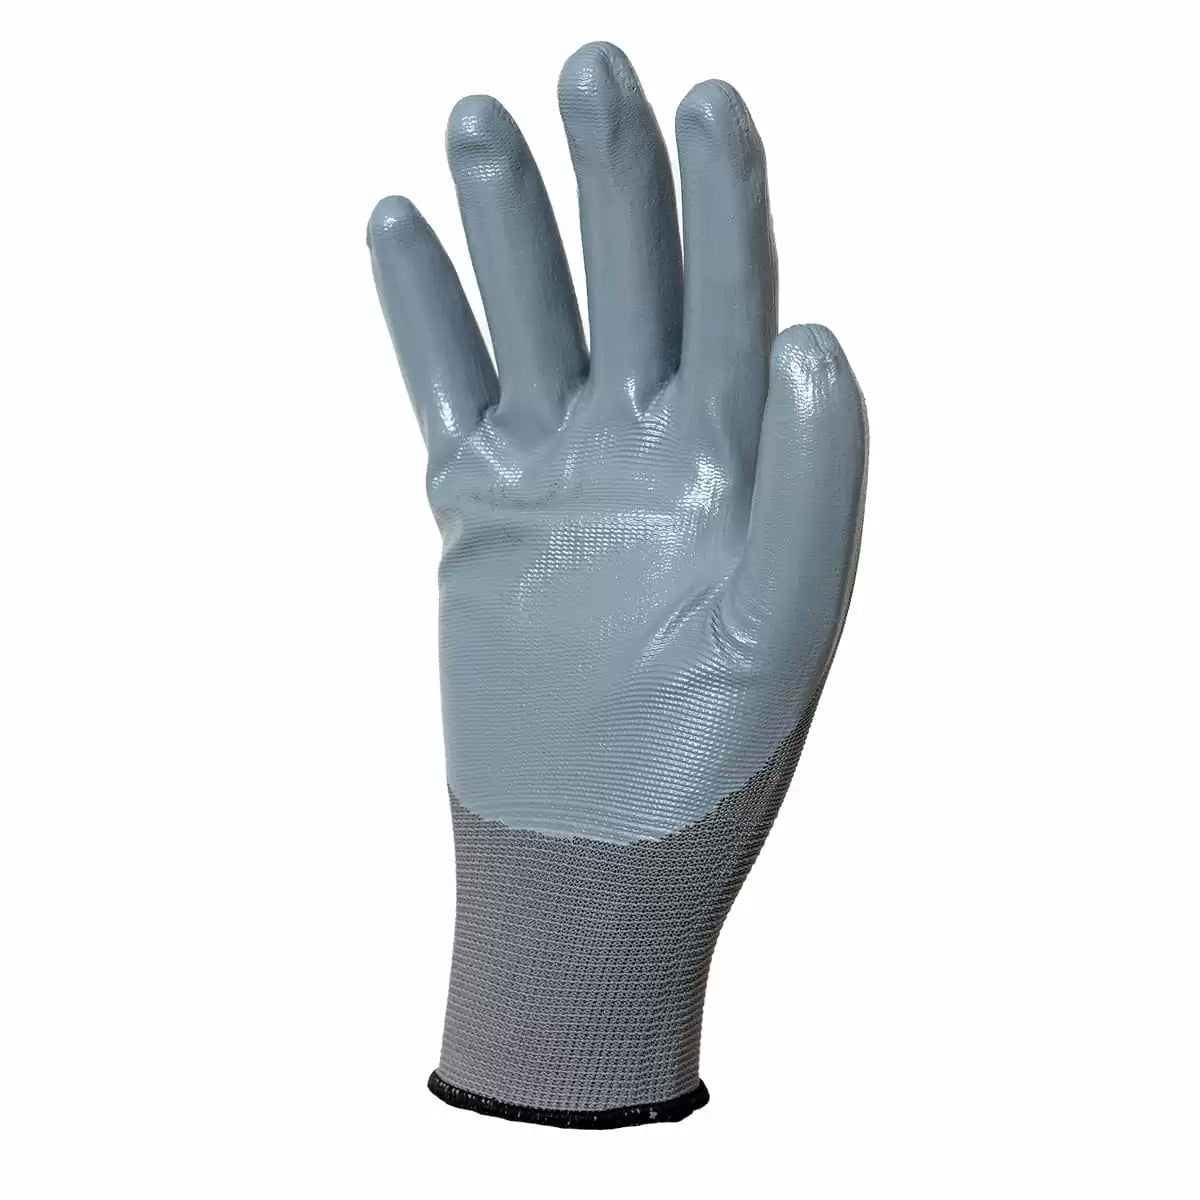 Laurus Work Gloves, Protective Gloves with Nitrile Coating, Abrasion and Cut Resistant, Size 10